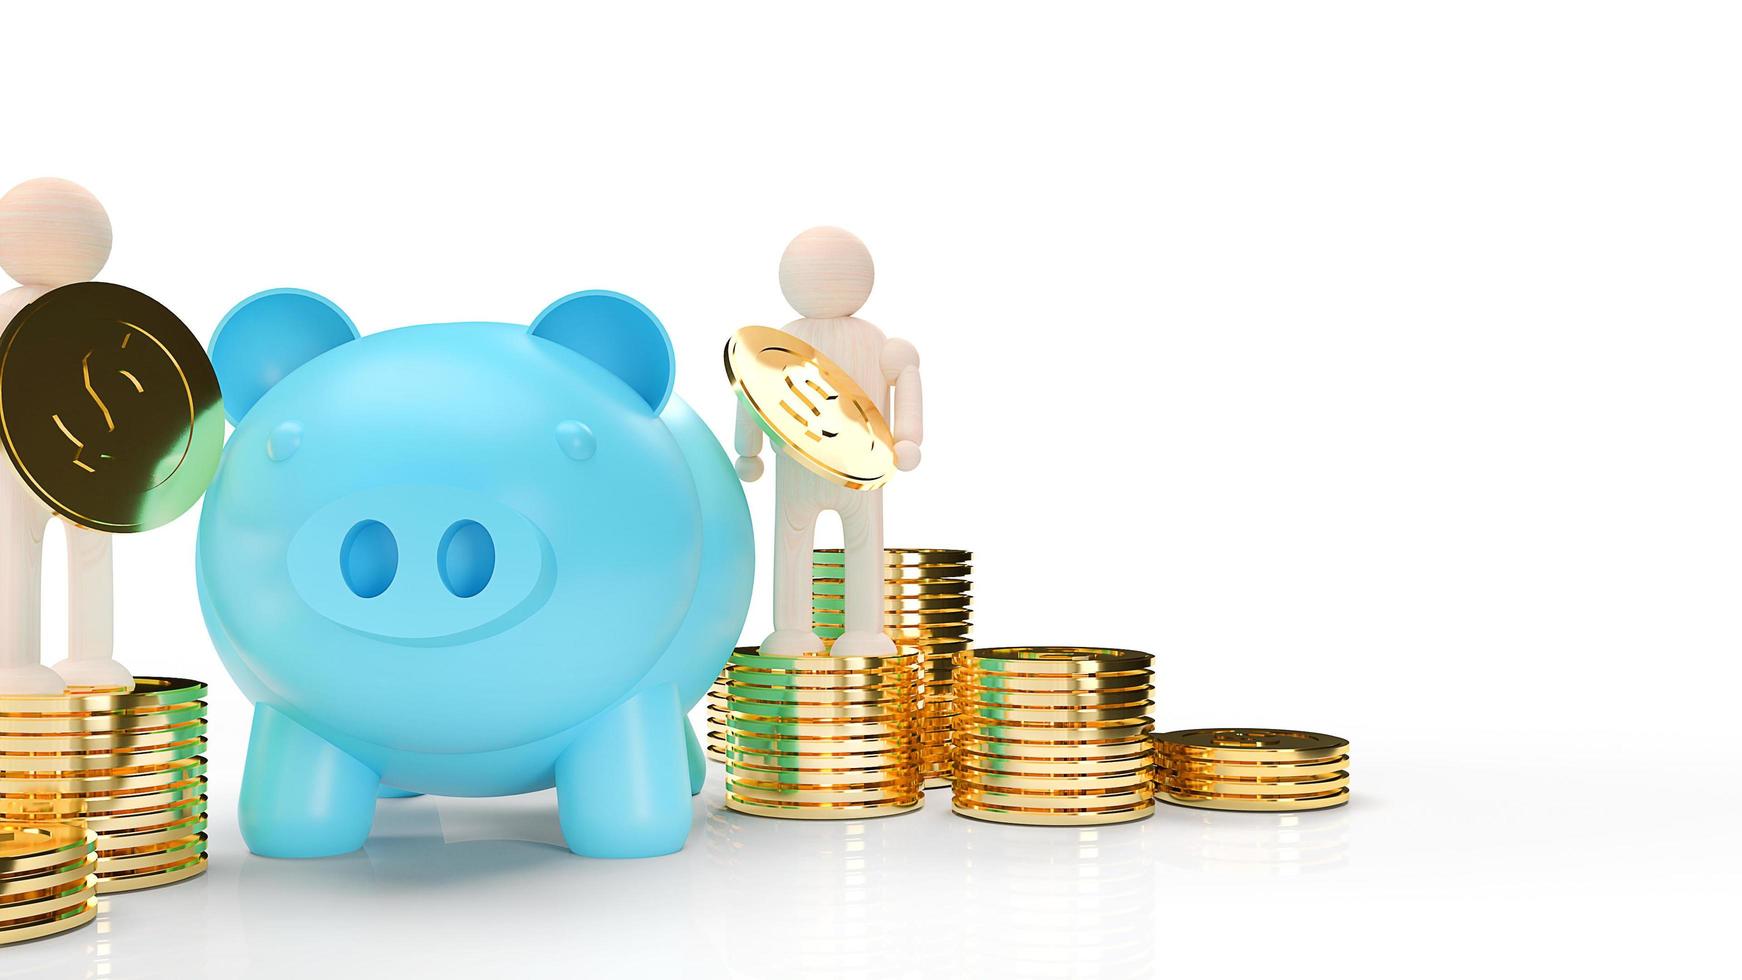 blue piggy bank and wood figure hold gold coins for business content 3d rendering. photo